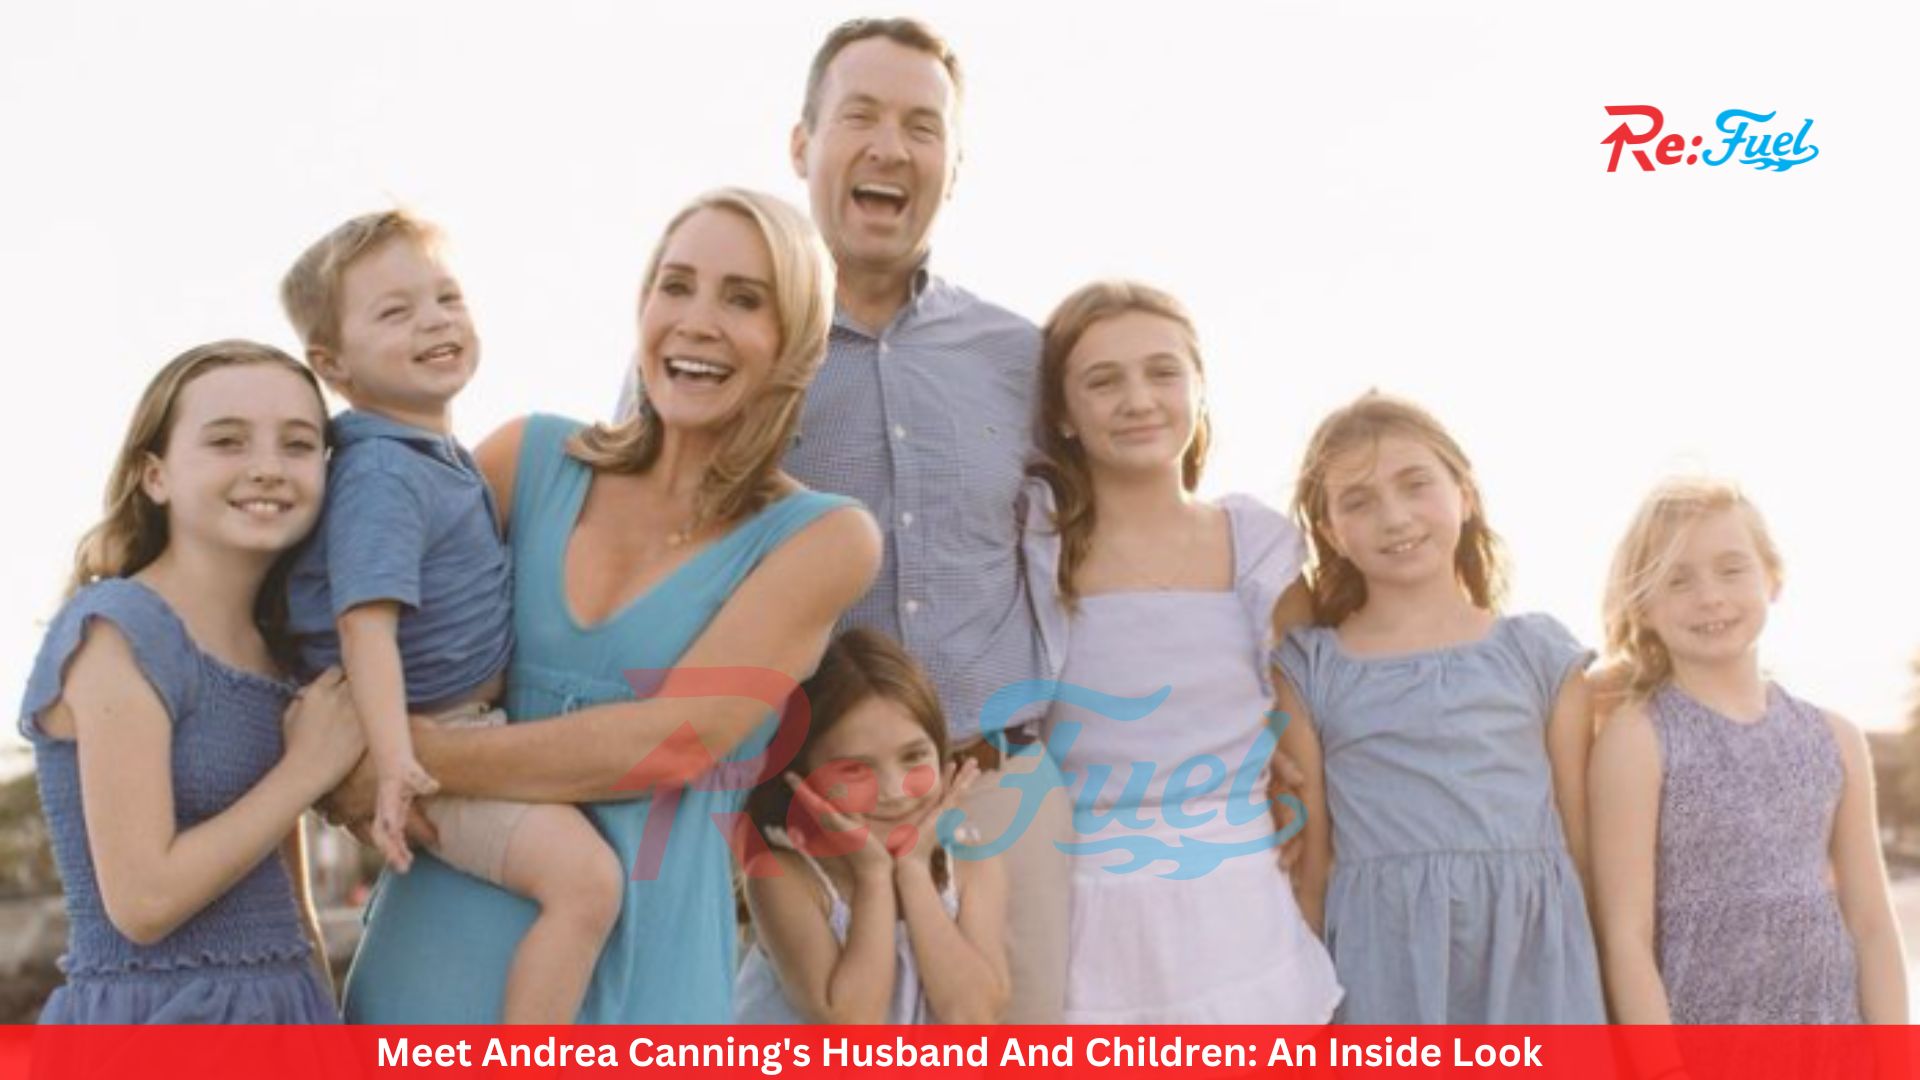 Meet Andrea Canning's Husband And Children: An Inside Look